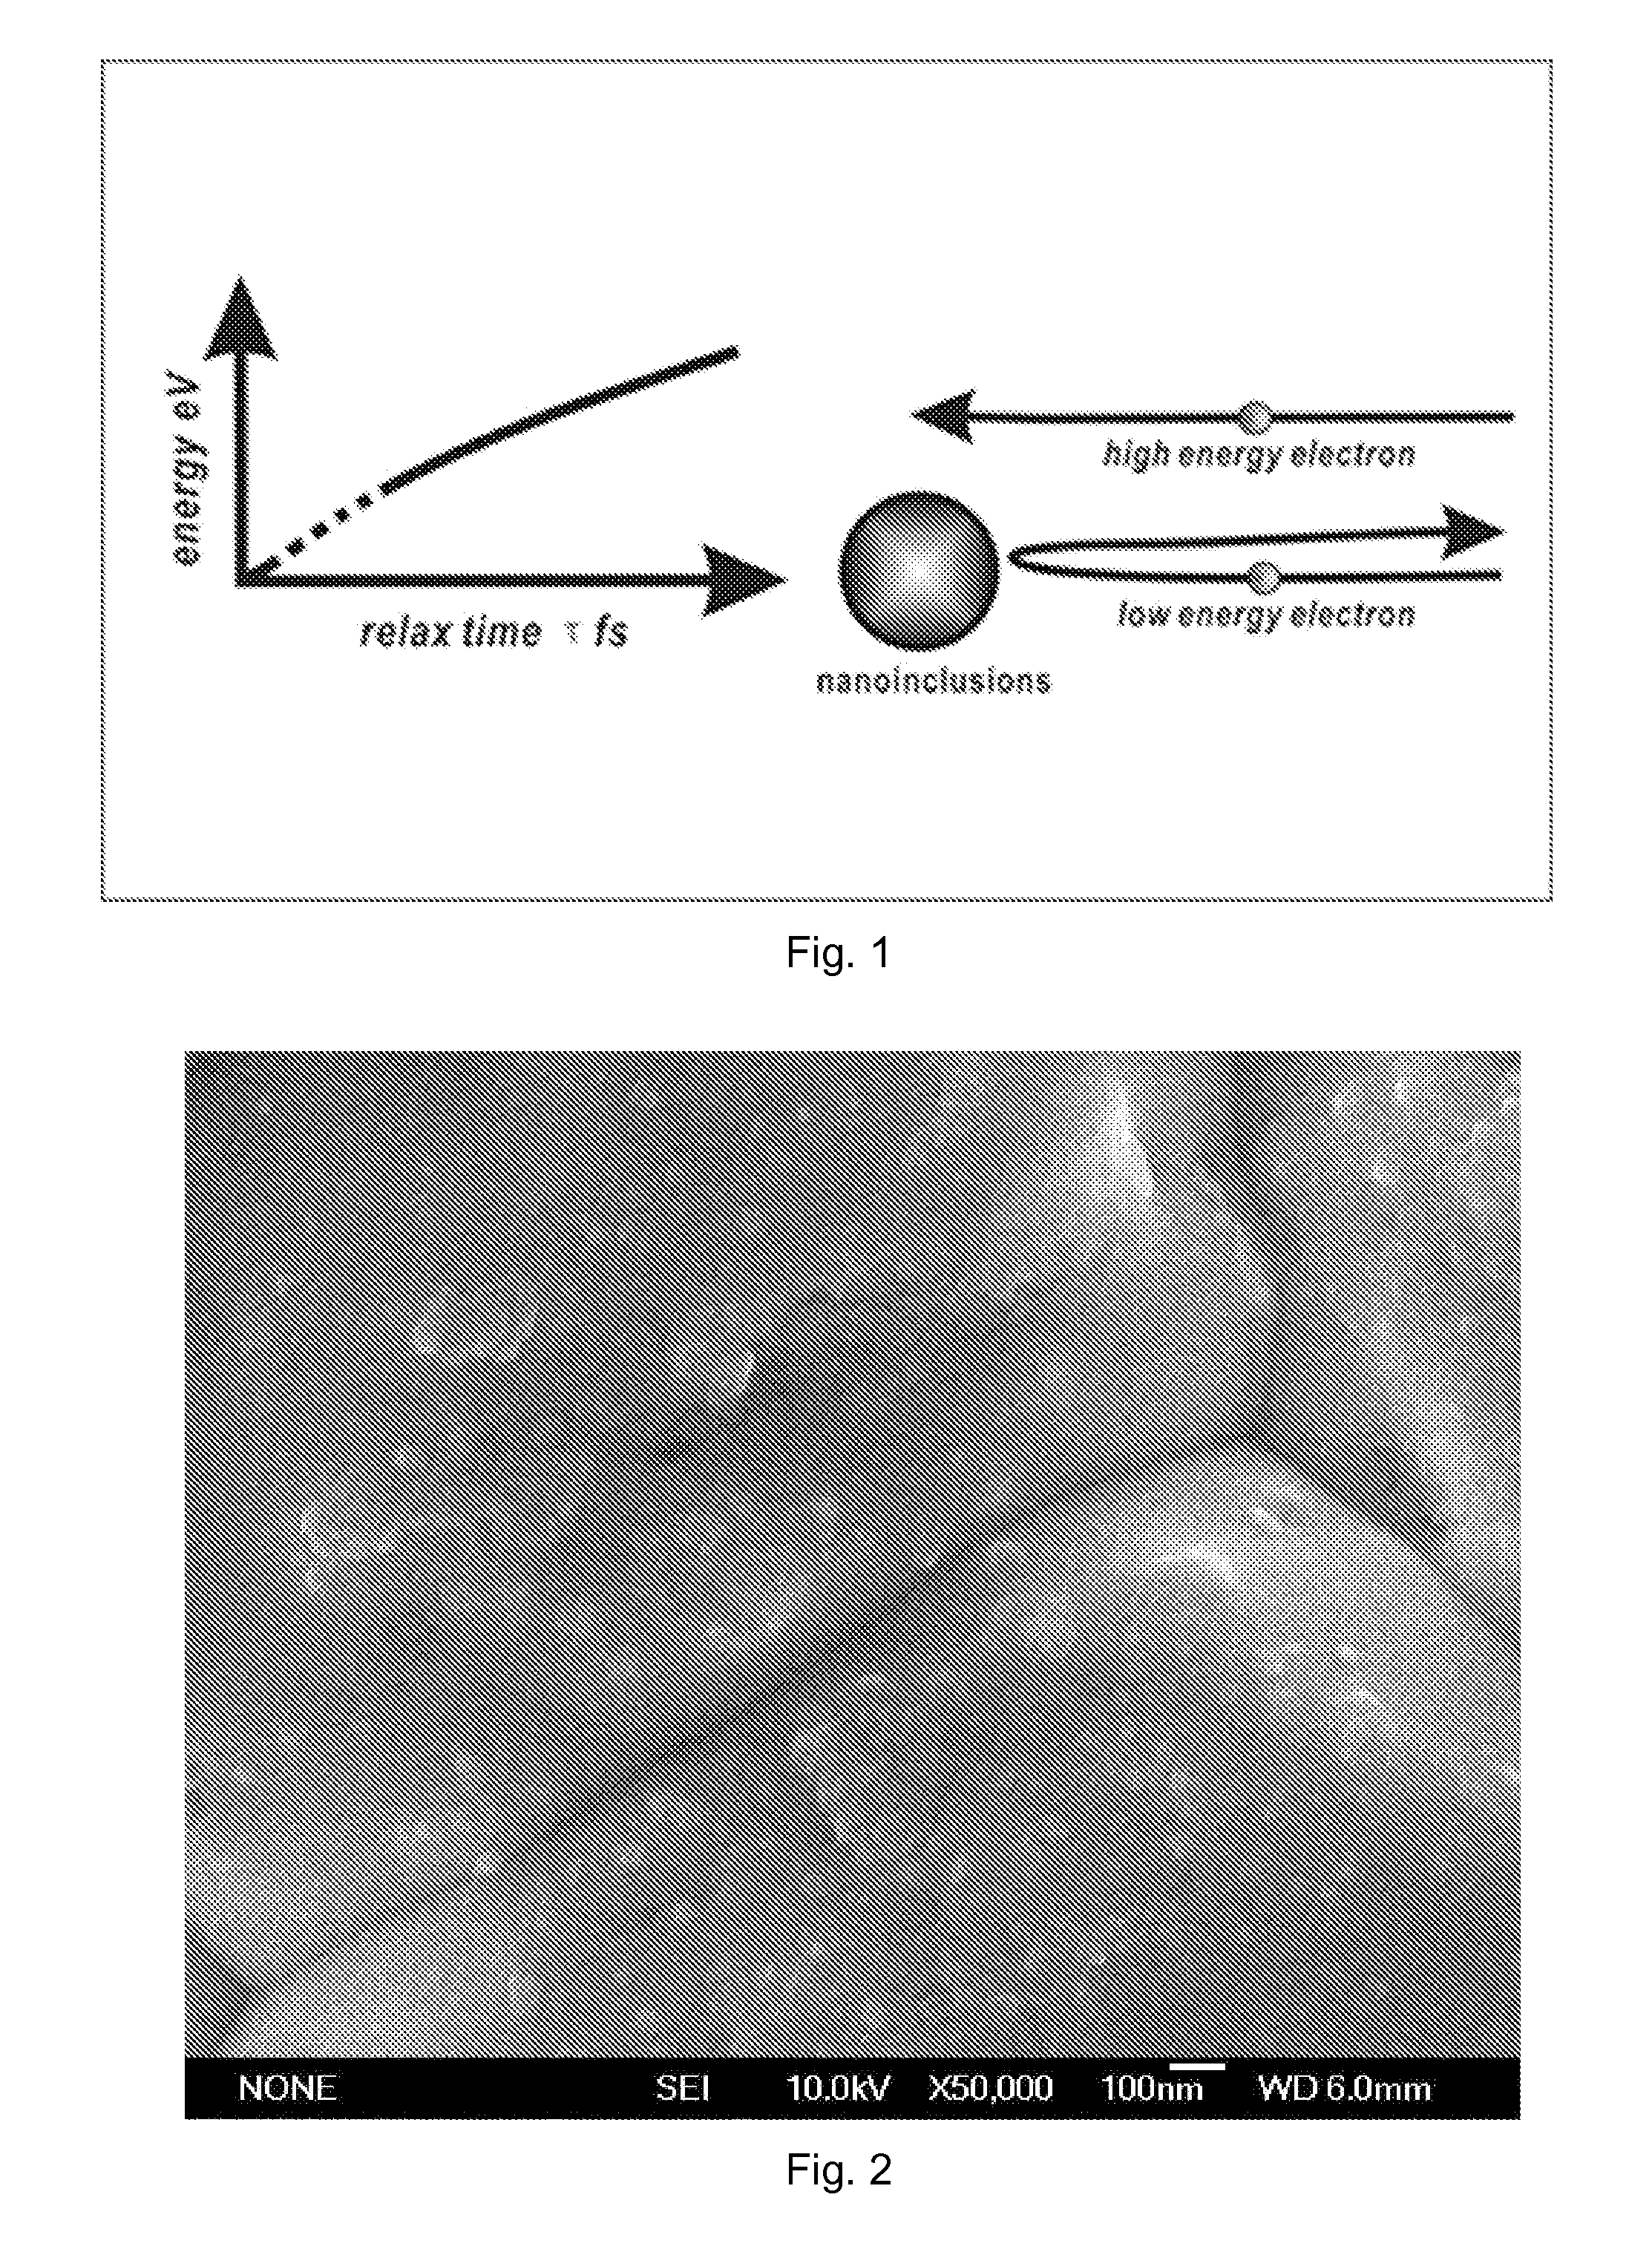 P-type skutterudite material and method of making the same